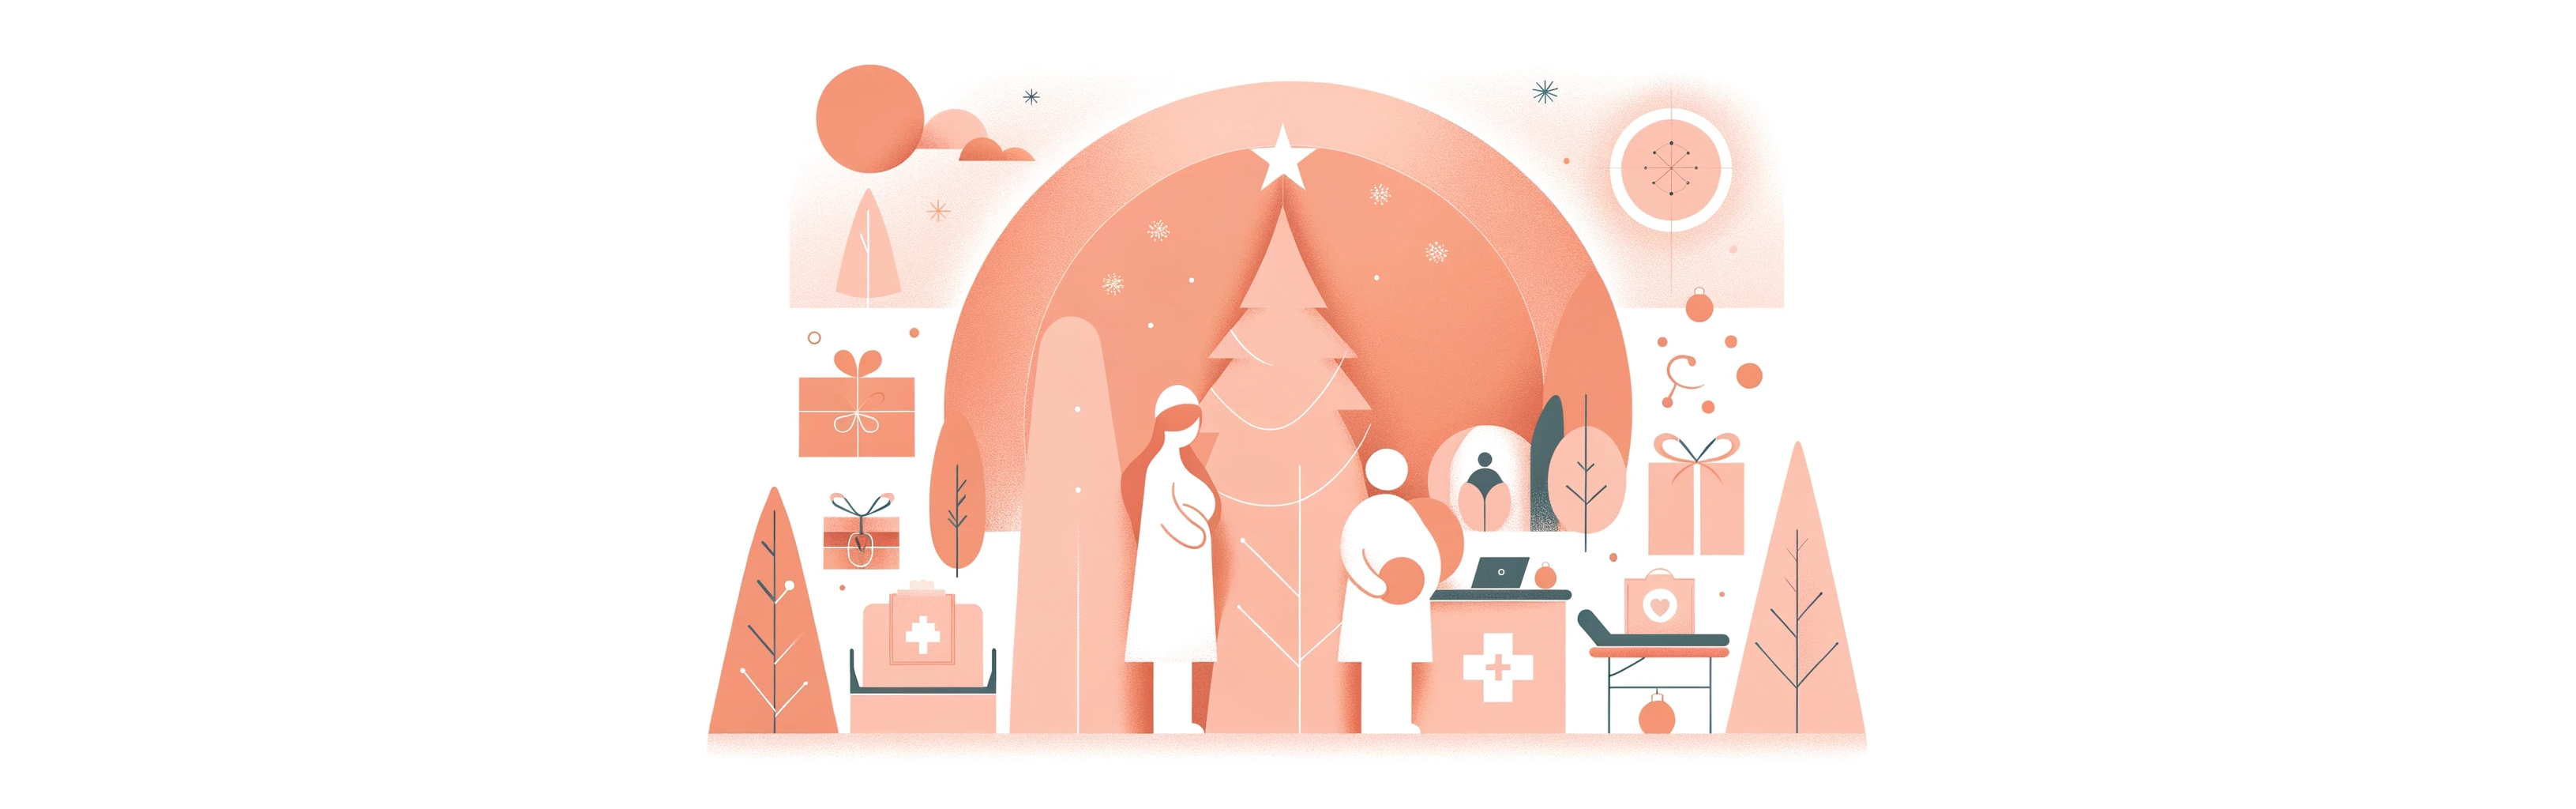 Happy Holidays 2023 from London Pregnancy Clinic! An illustrative 2D minimalist holiday scene with soft baby pink and pale orange hues, featuring abstract representations of clinicians and maternity care, symbolising warmth and festive cheer.